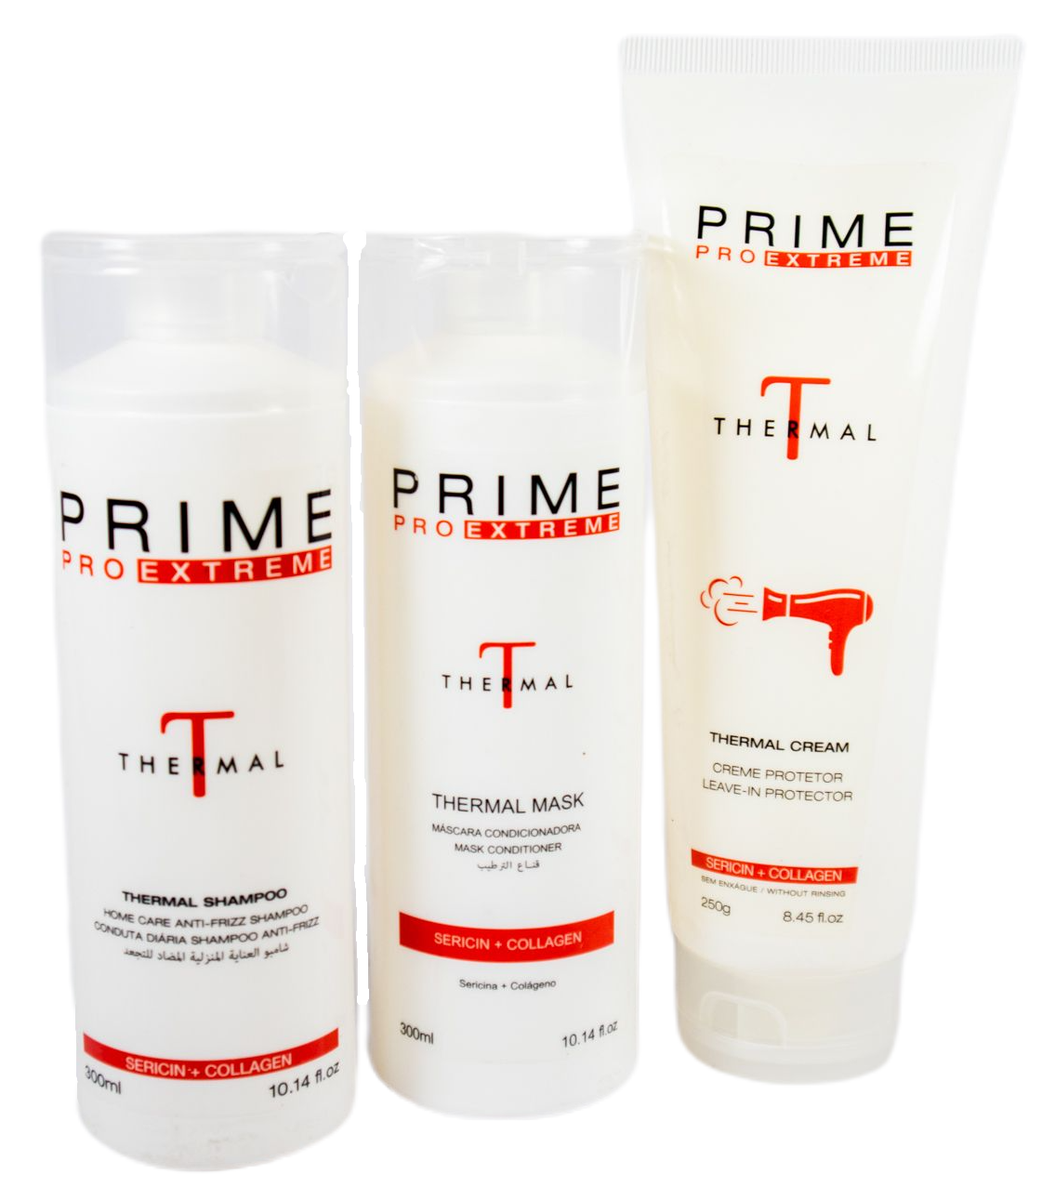 Professional Thermal Home Care Kit 3 Products - Prime Pro